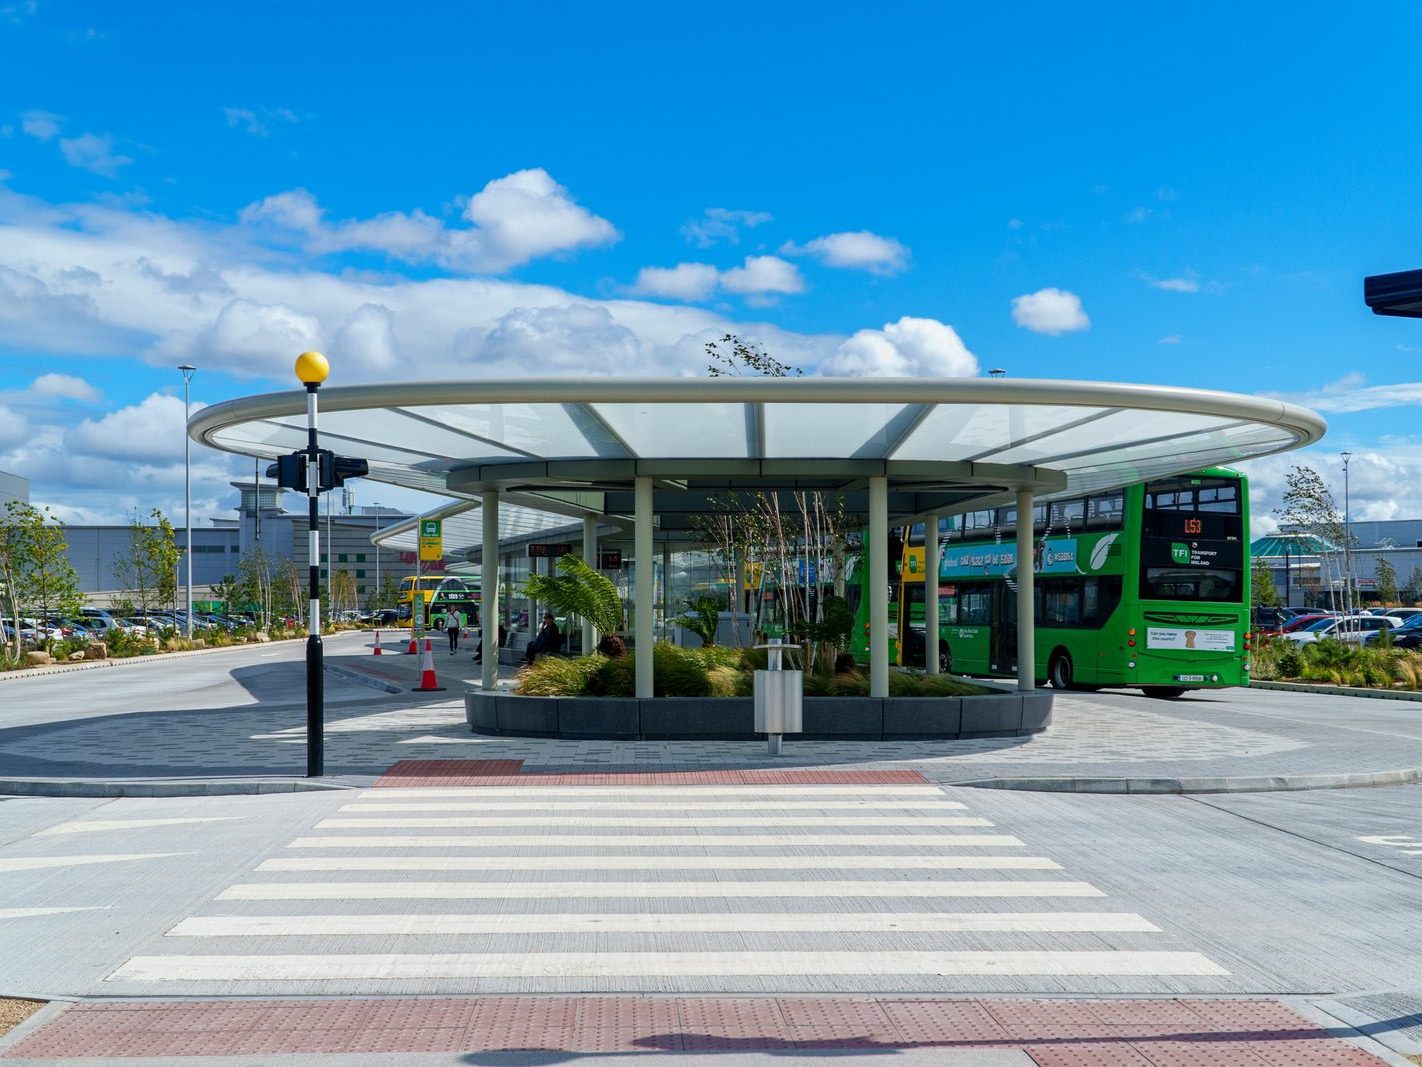 THE NEW BUS PLAZA THAT I DID NOT KNOW ABOUT [AT LIFFEY VALLEY SHOPPING CENTRE] 008